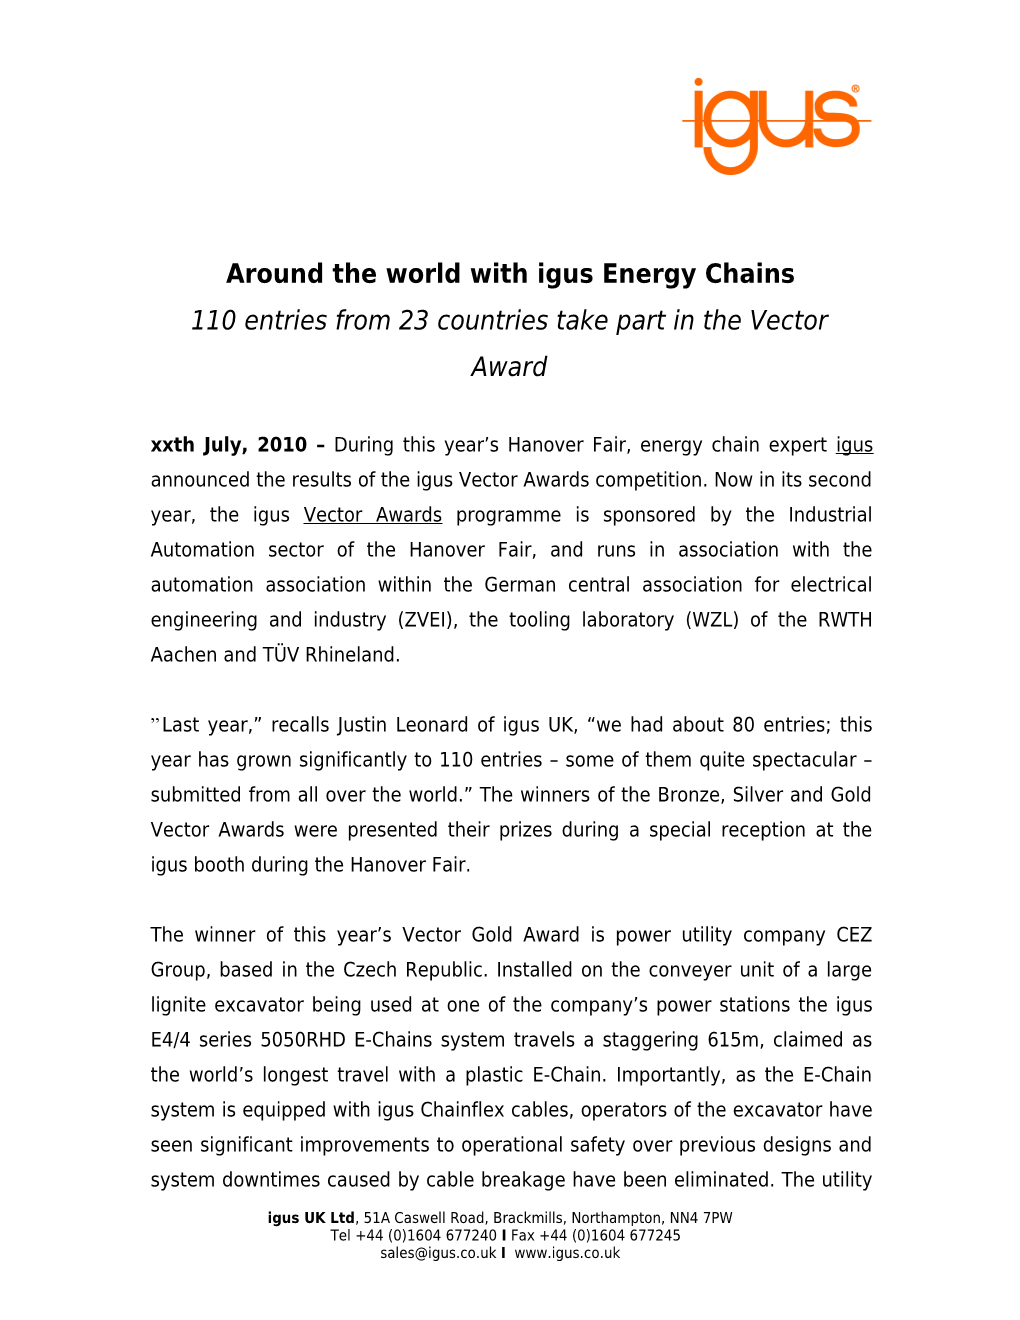 Around The World With Igus Energy Chains